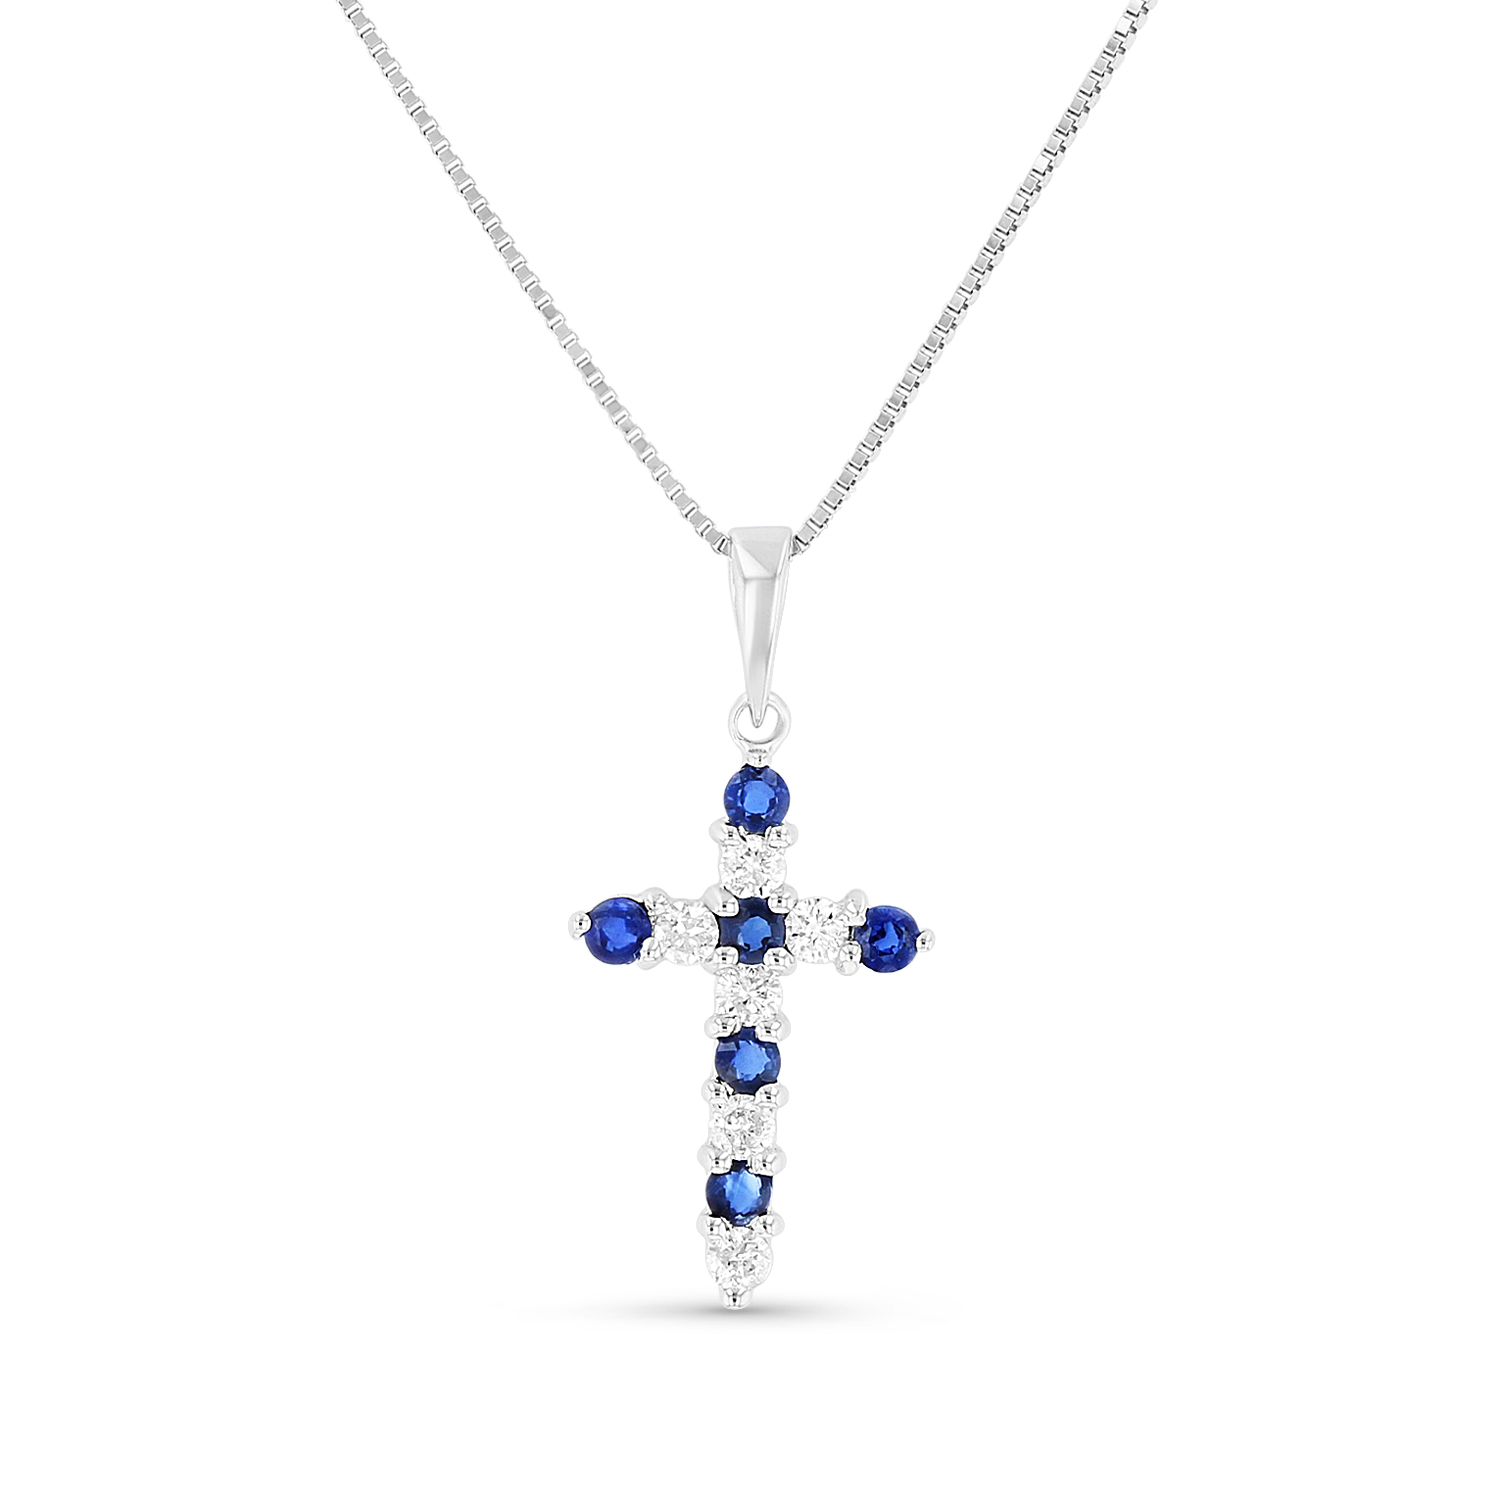 View 0.30ctw Diamond and Sapphire Pendant in 14k White Gold